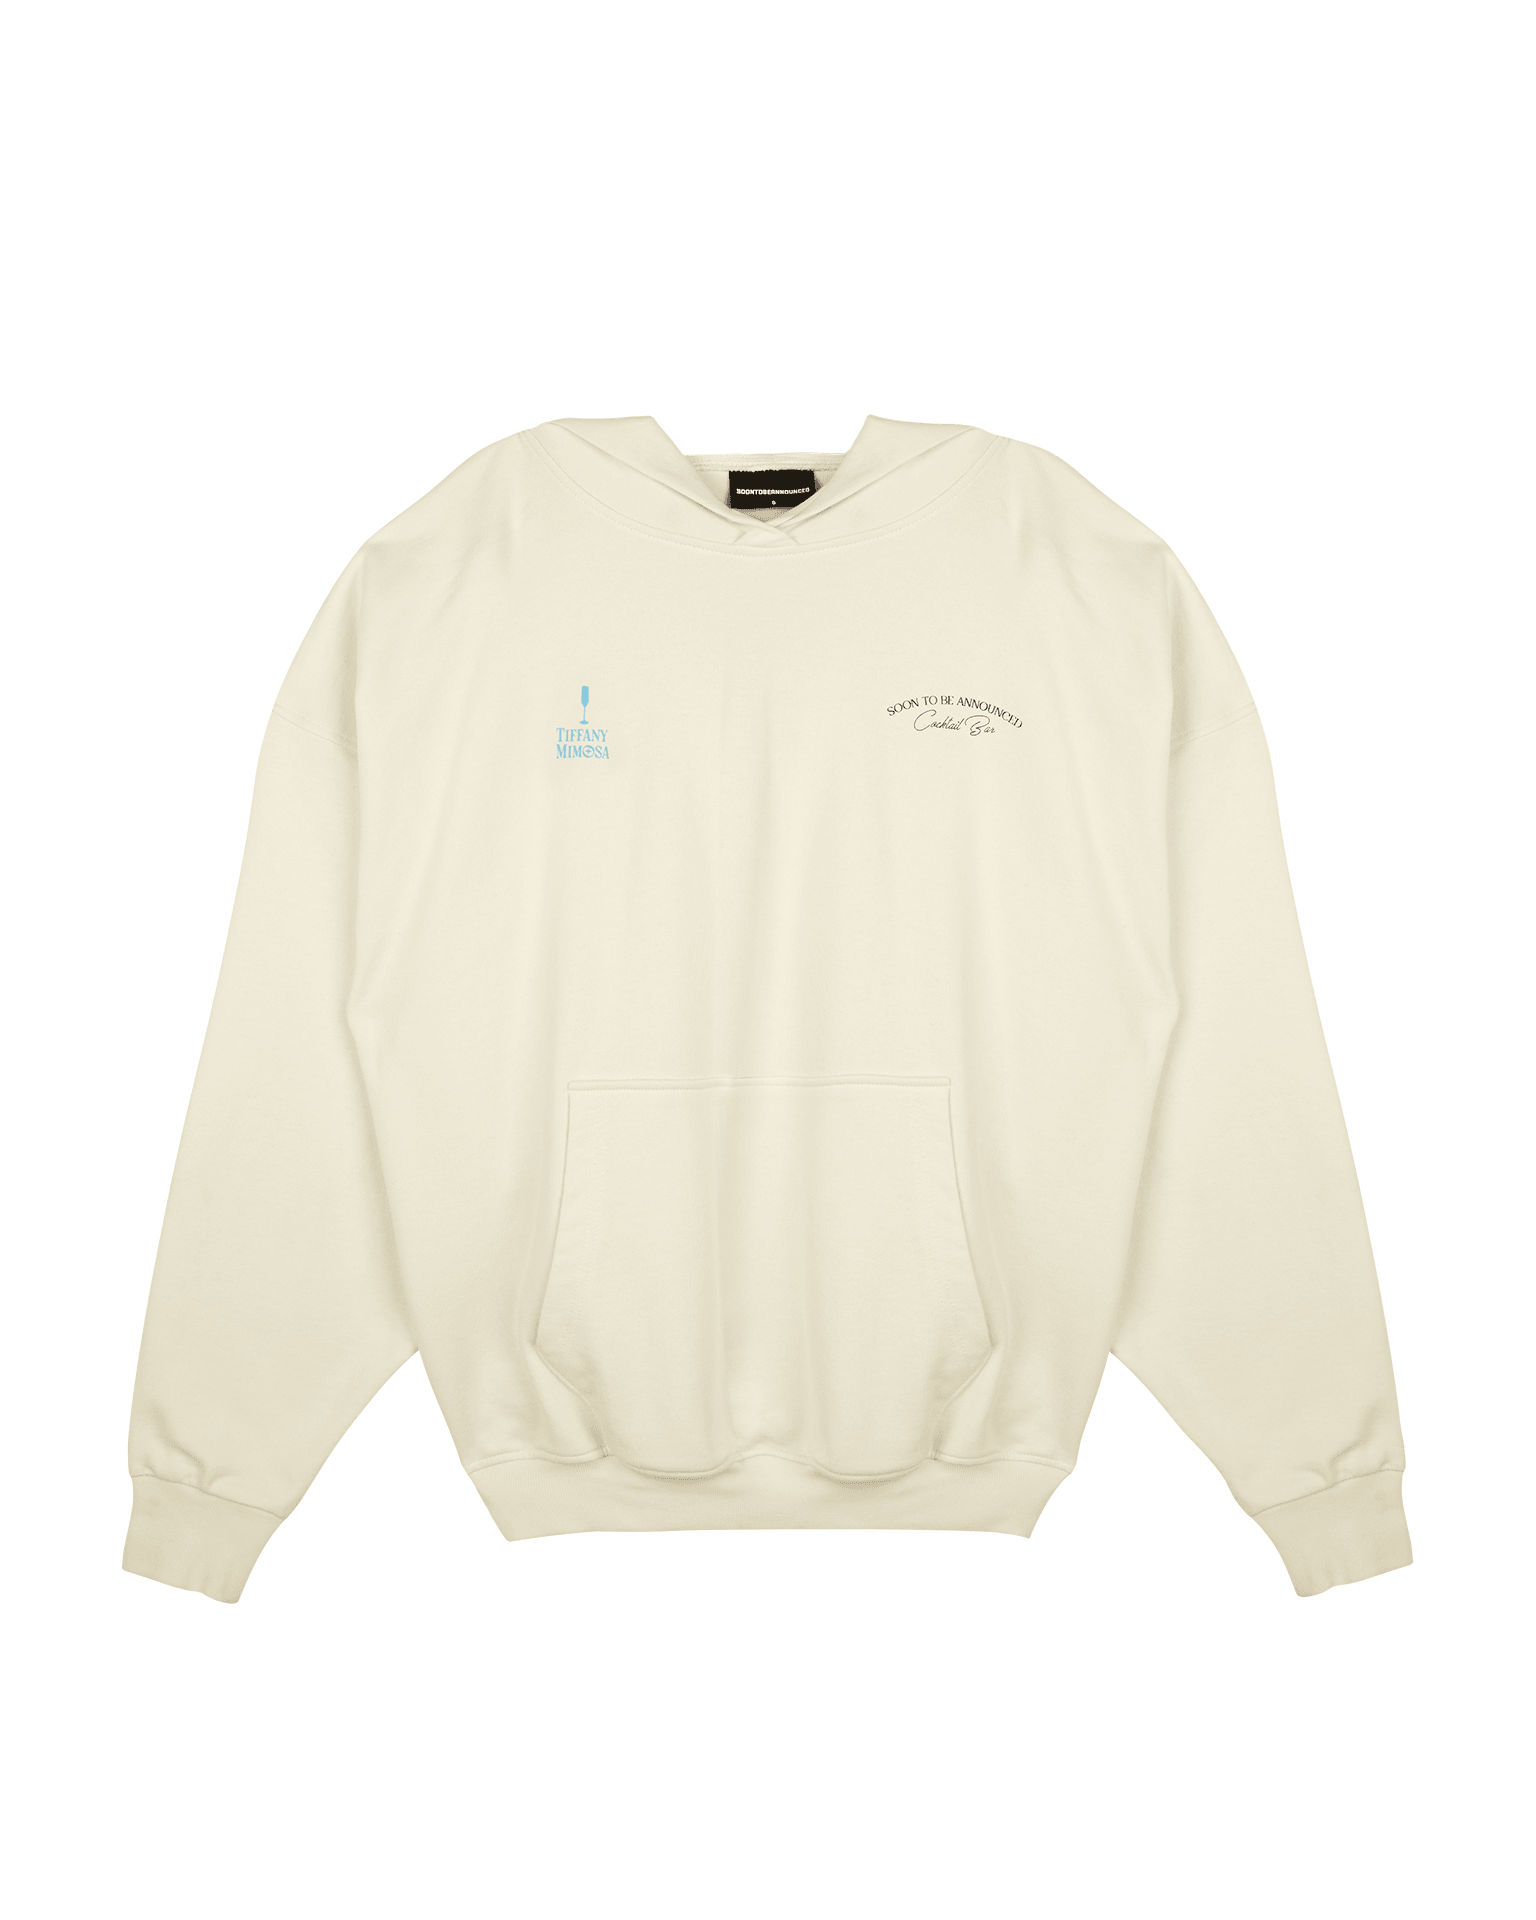 Tiffany Mimosa Hoodie - SOON TO BE ANNOUNCED